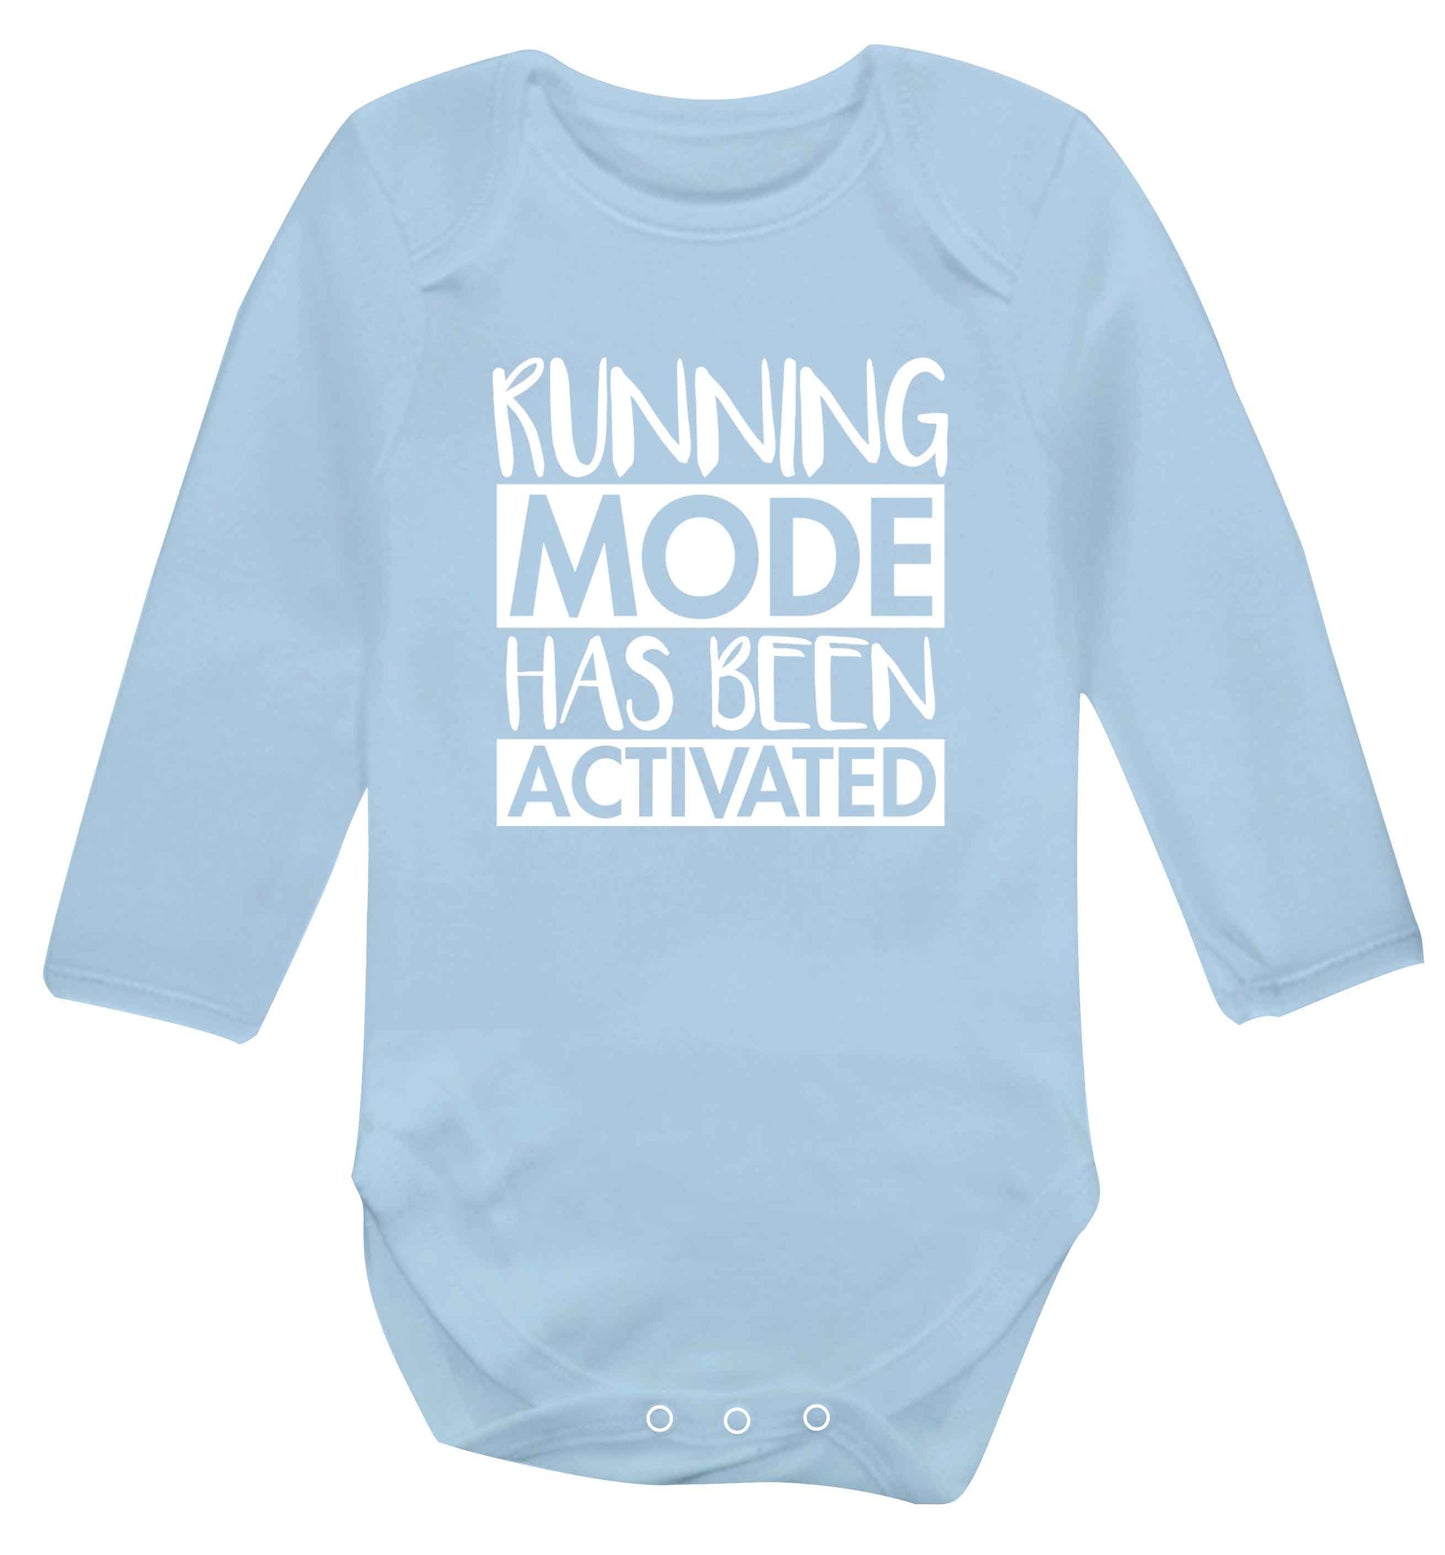 Running mode has been activated baby vest long sleeved pale blue 6-12 months